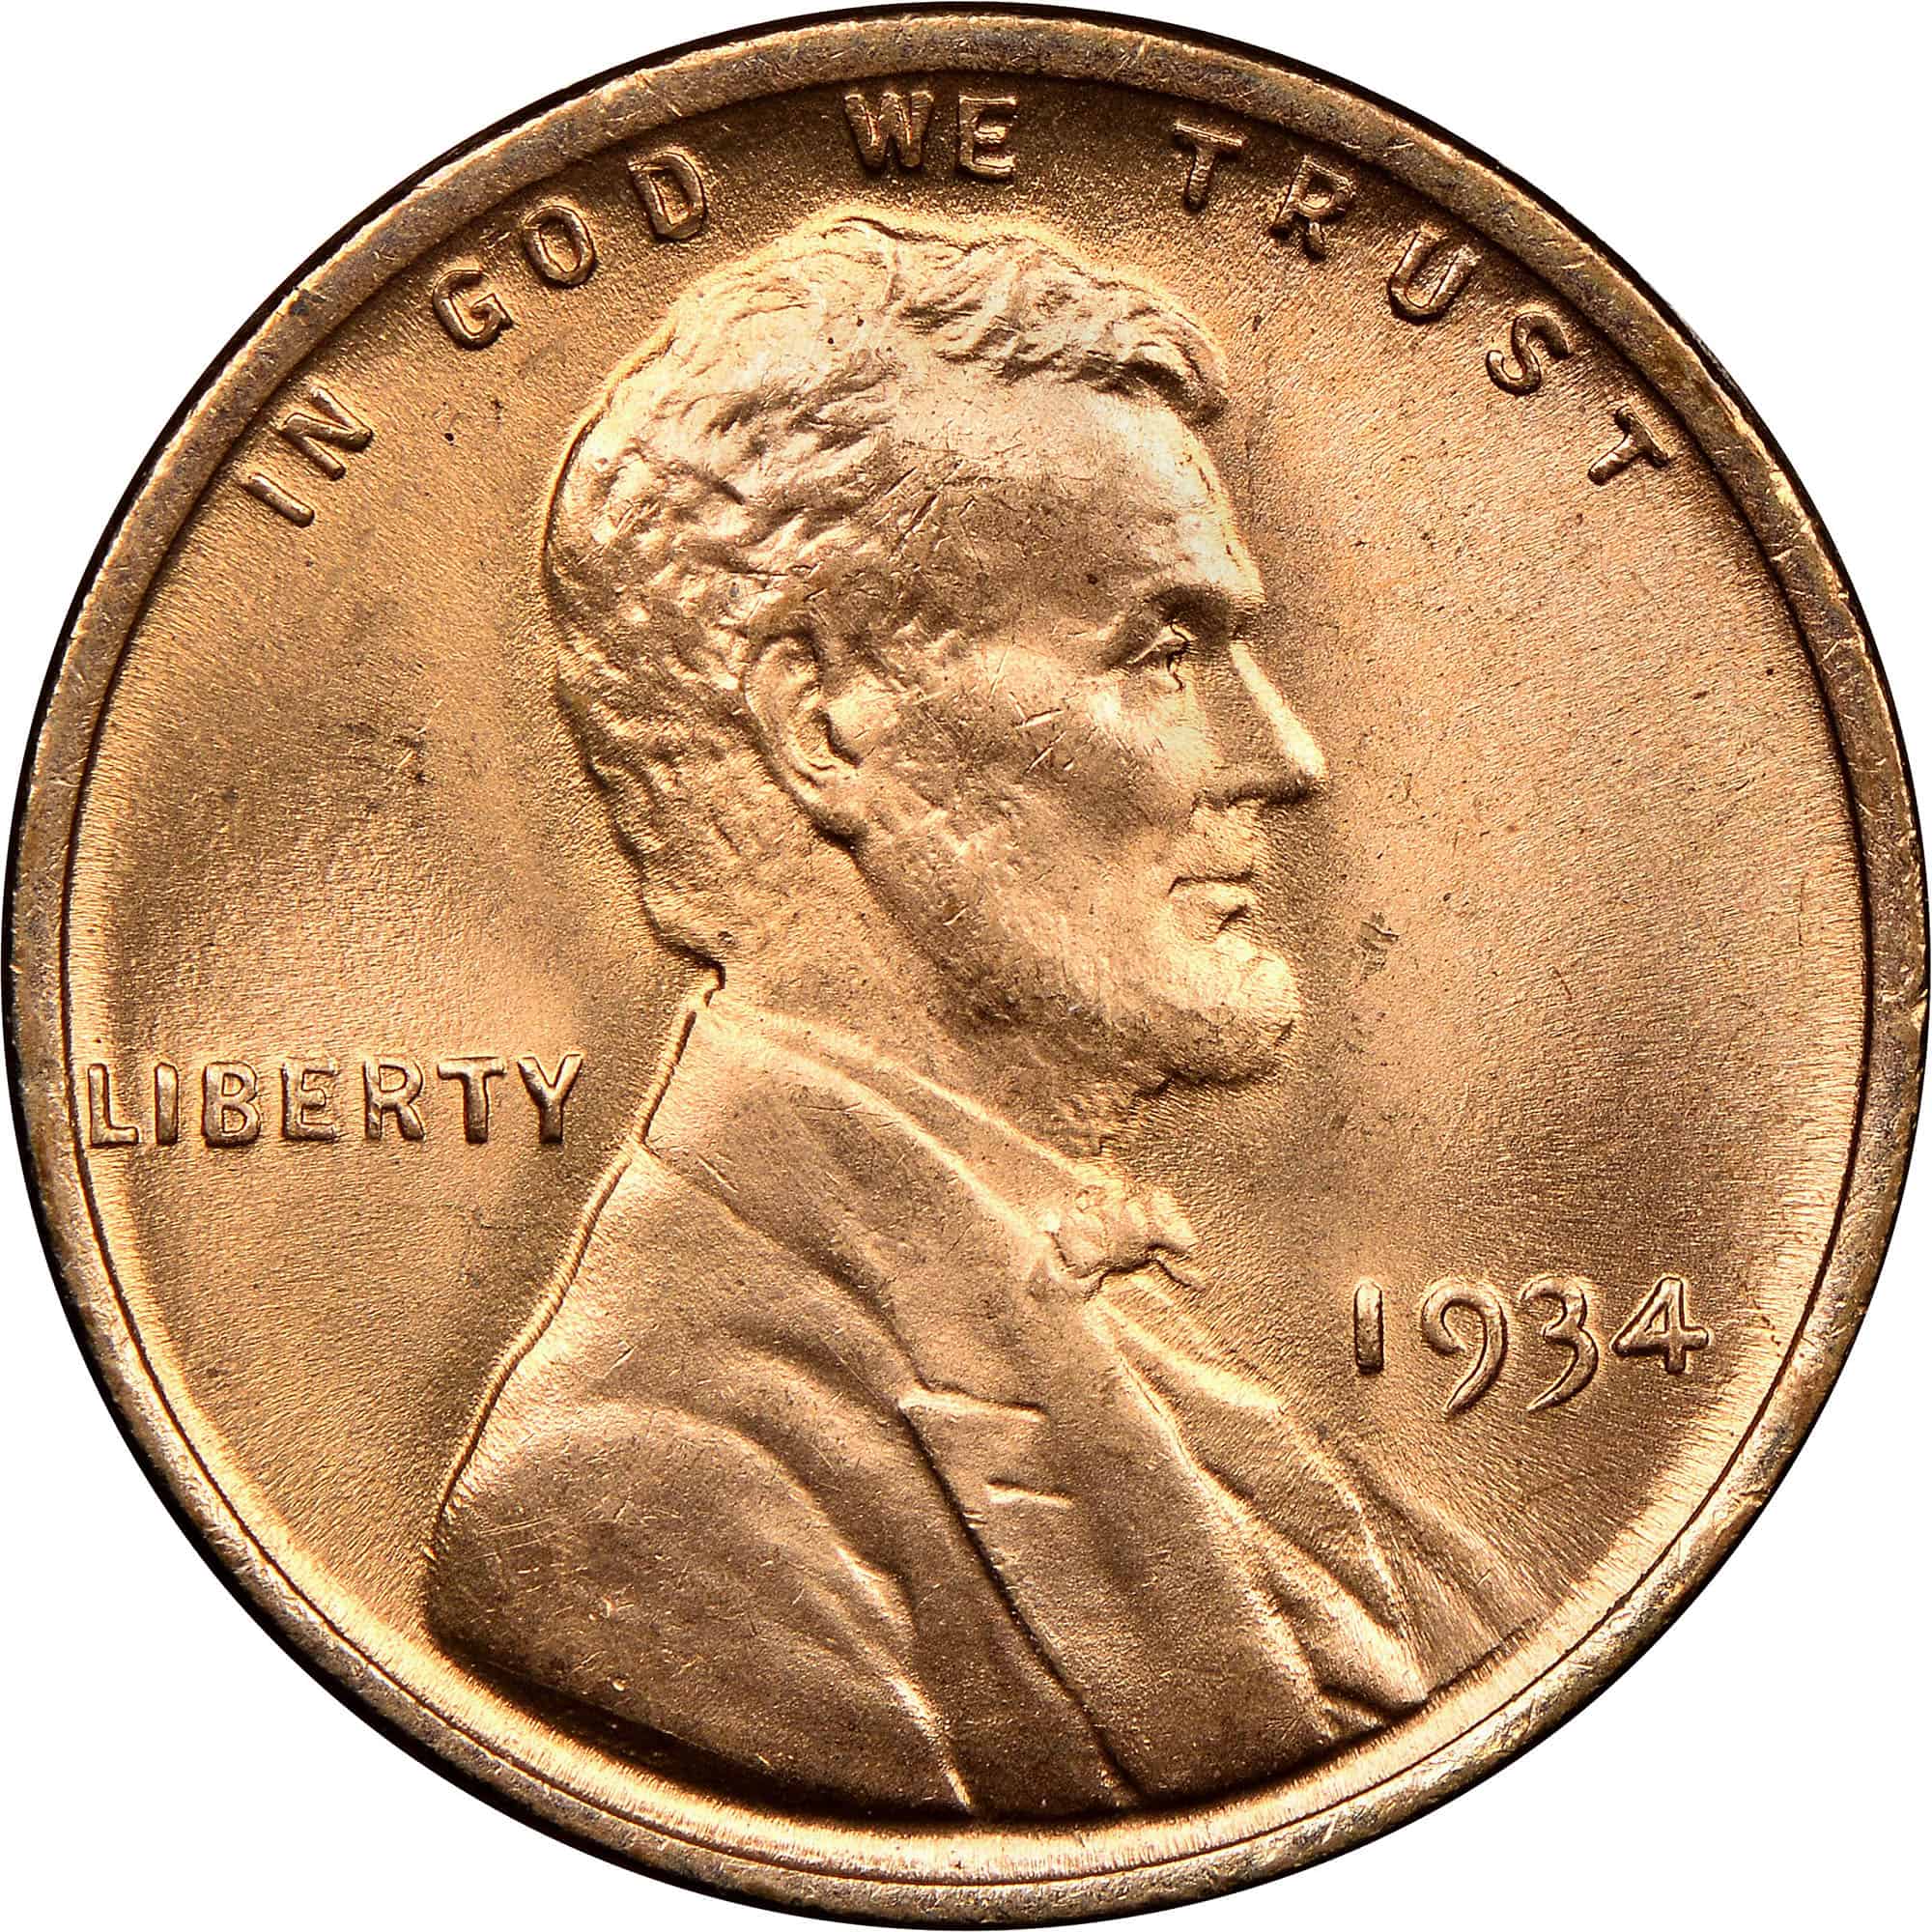 The obverse of the 1934 Lincoln penny